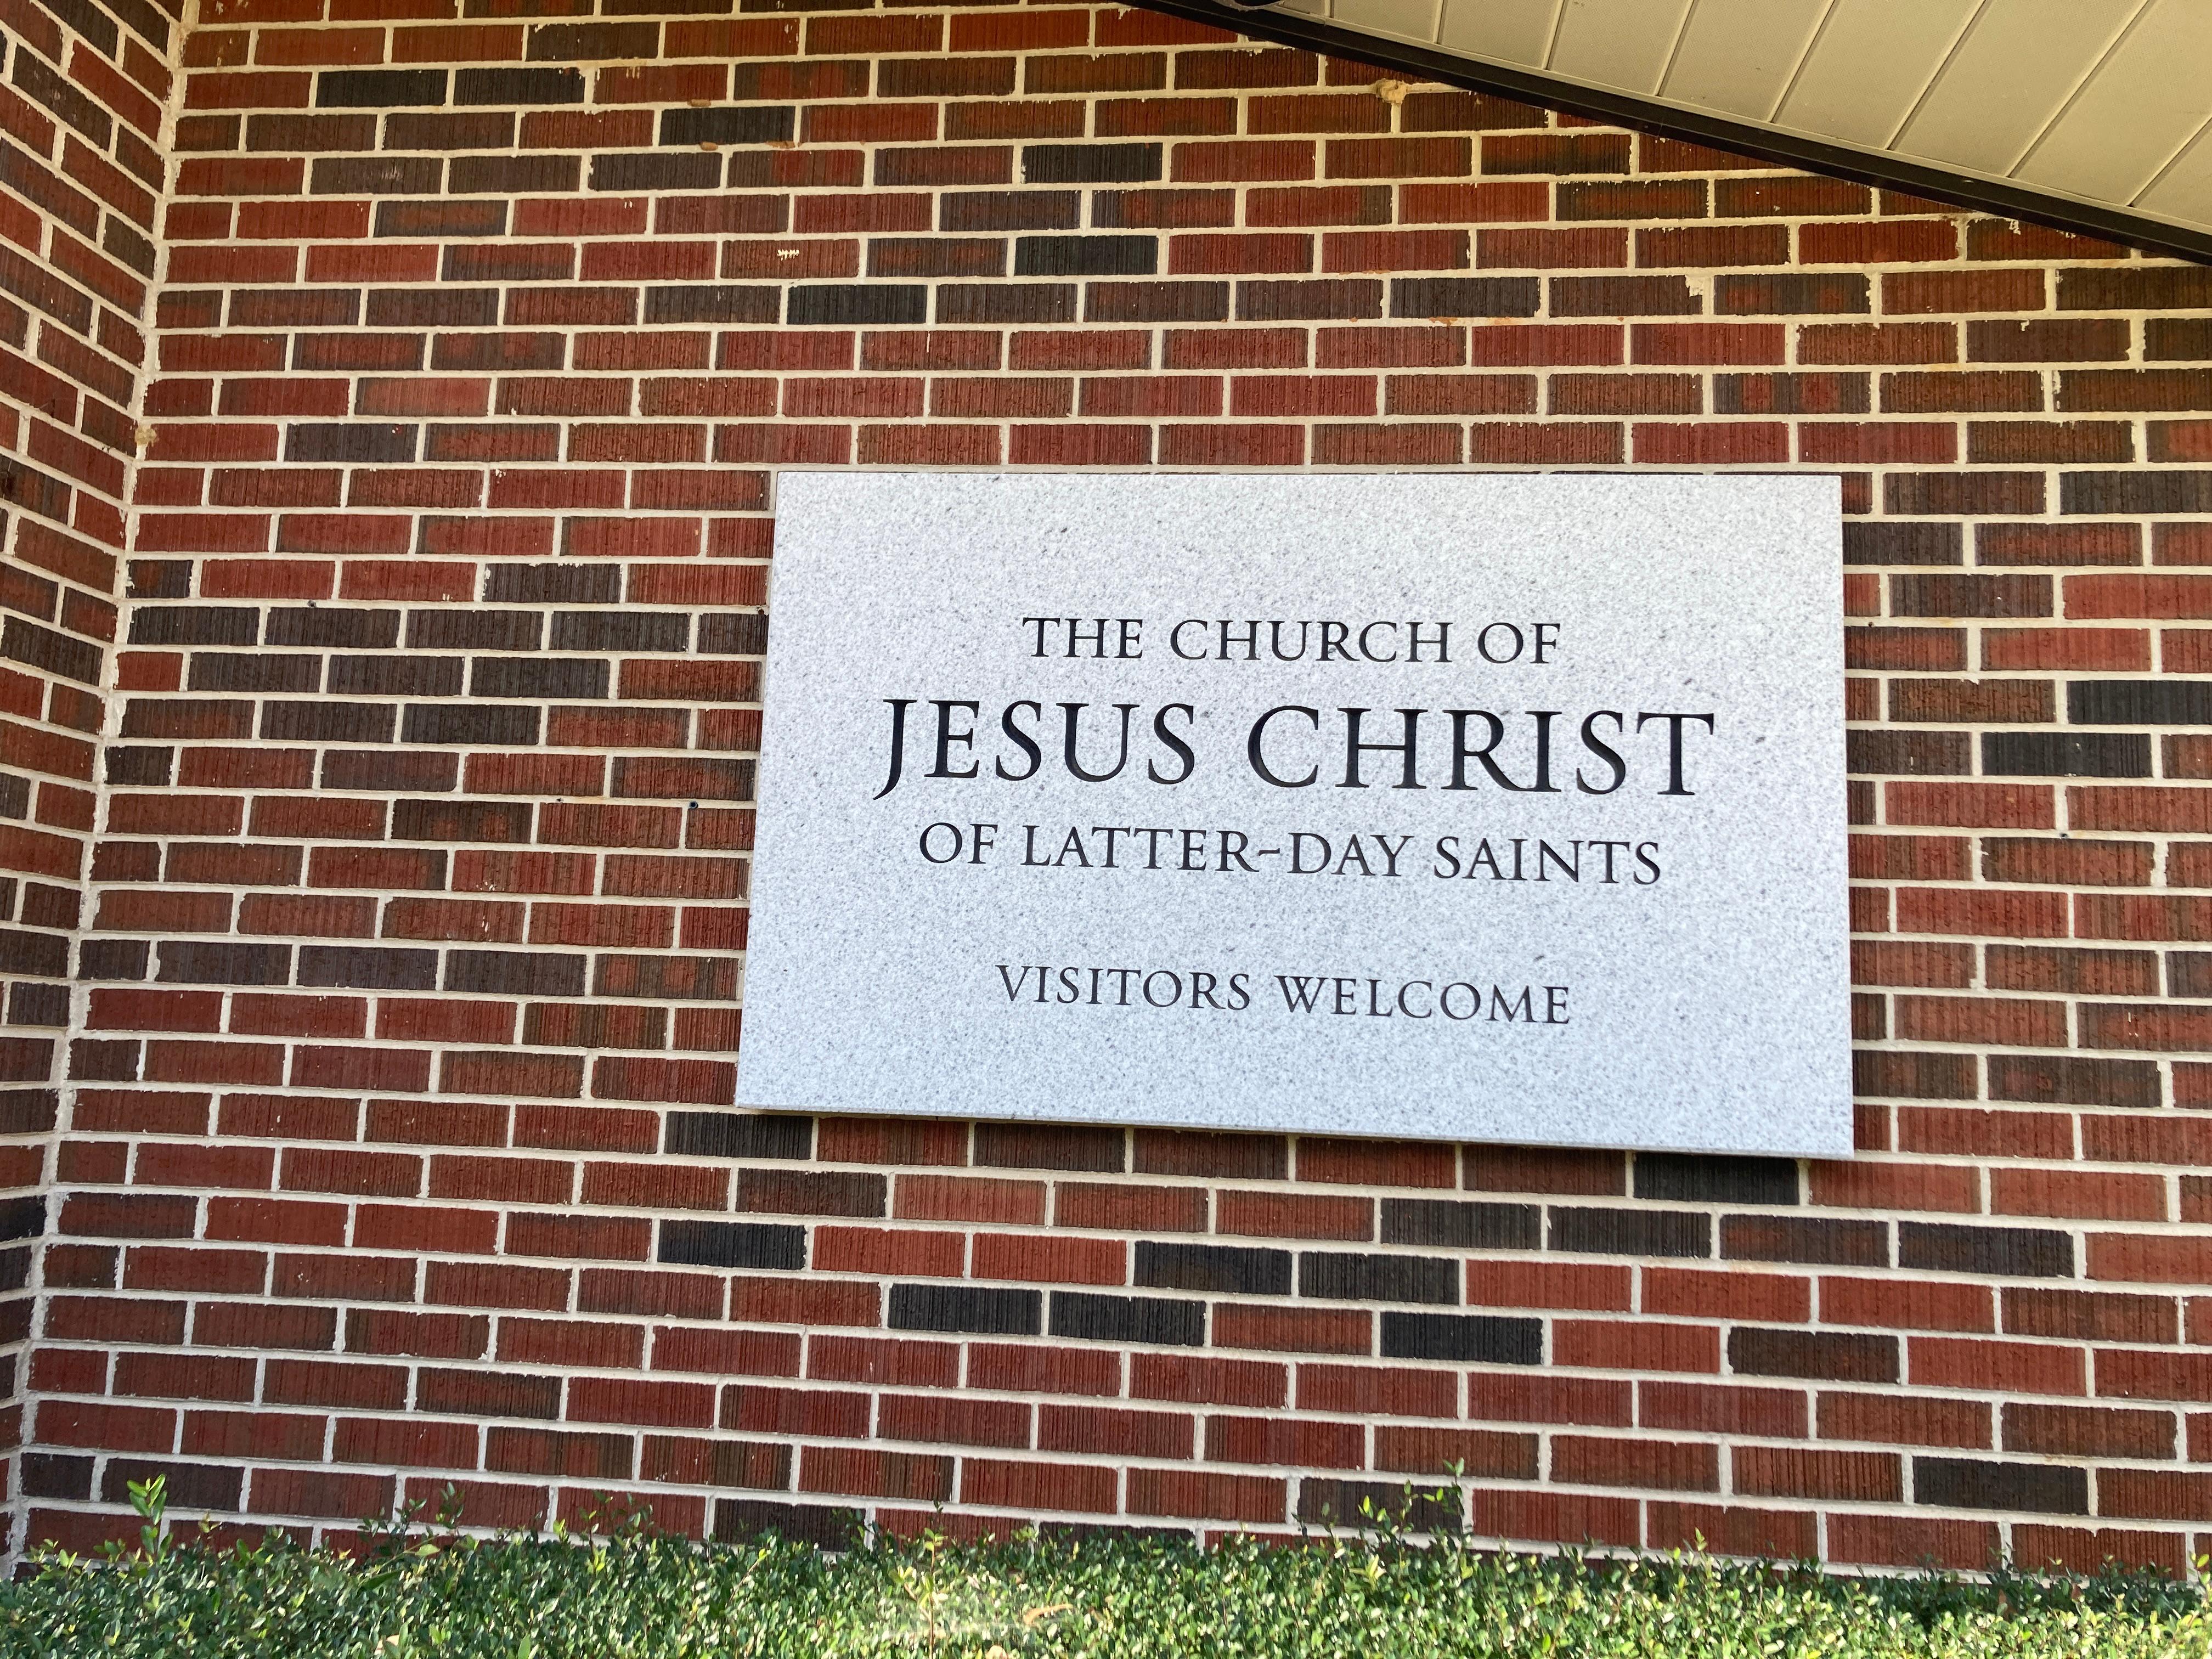 Visitors welcome!